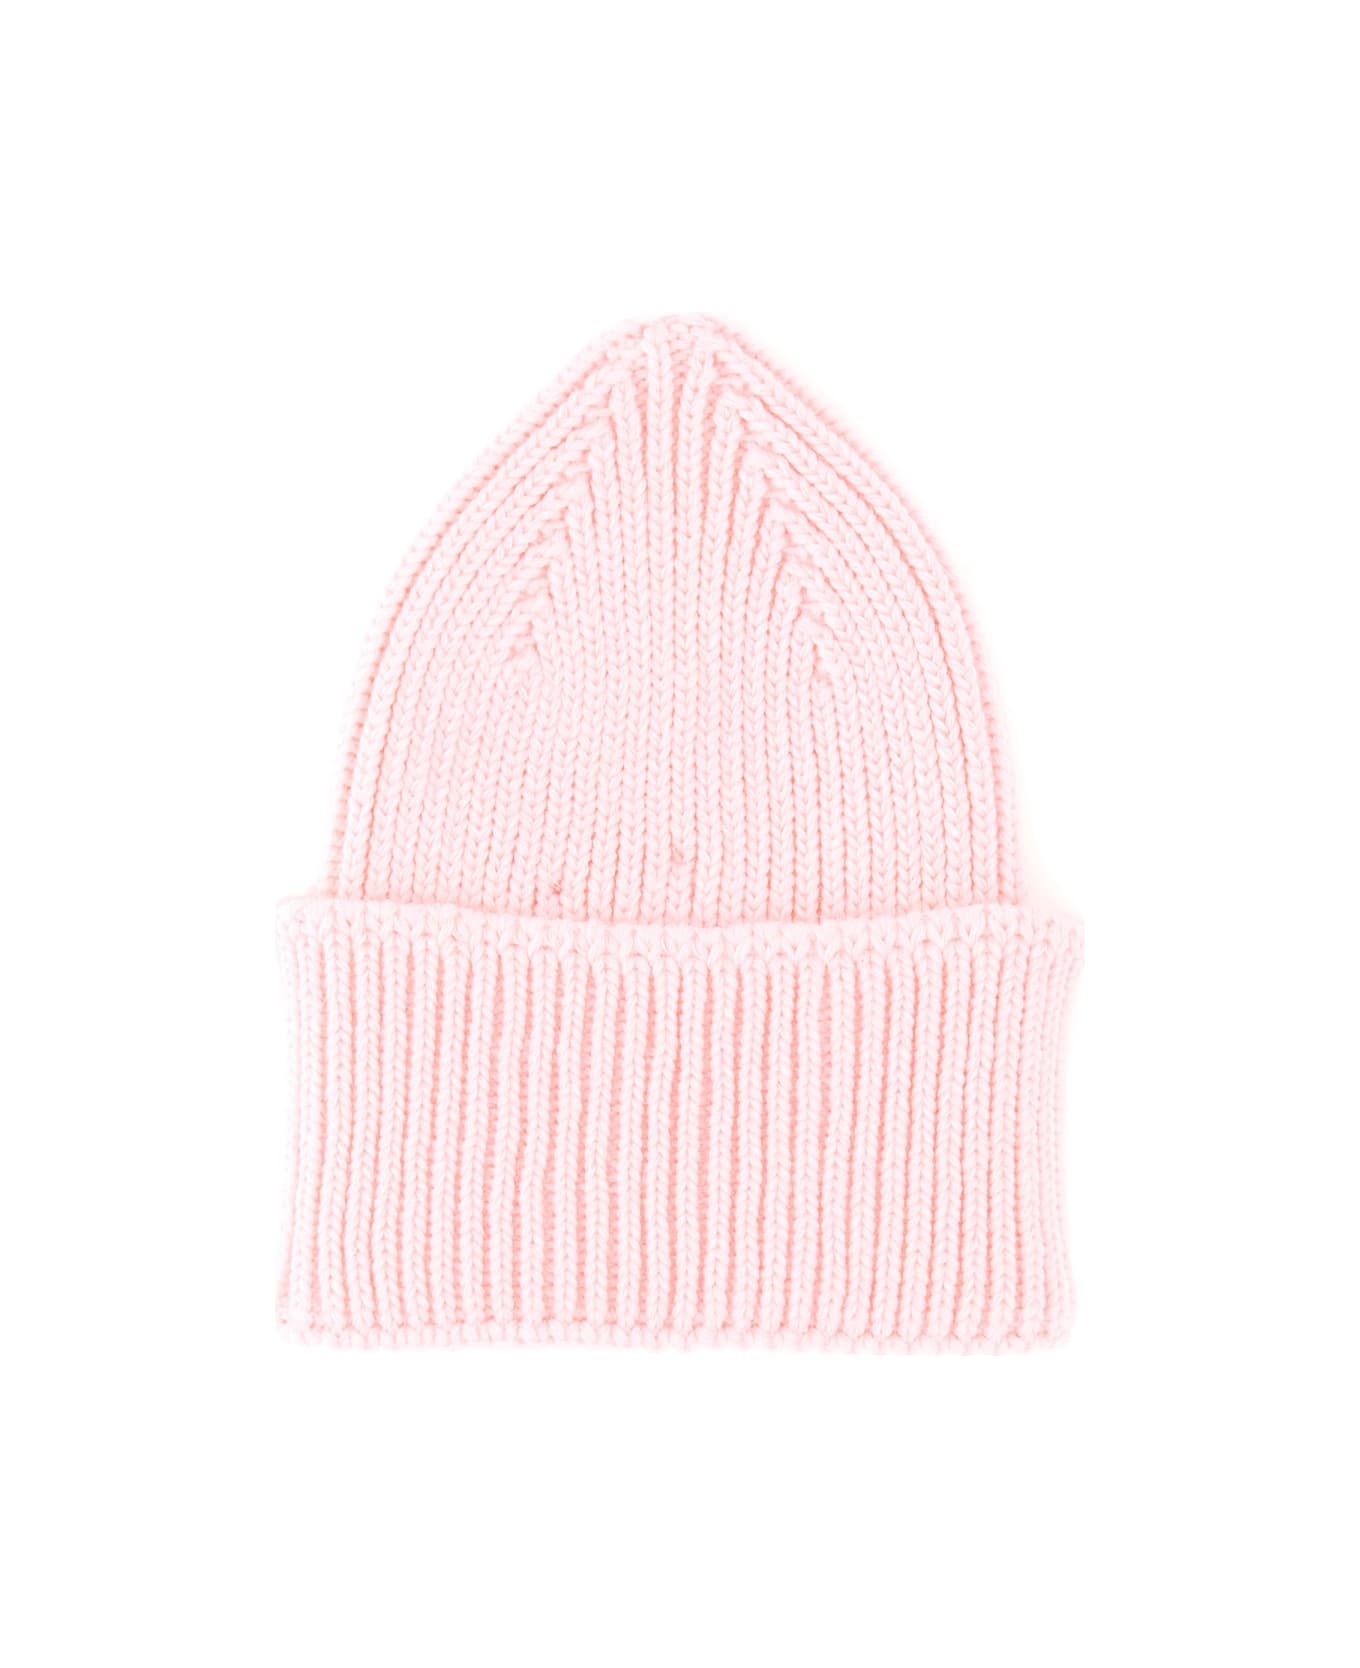 Family First Milano Beanie Hat - PINK 帽子